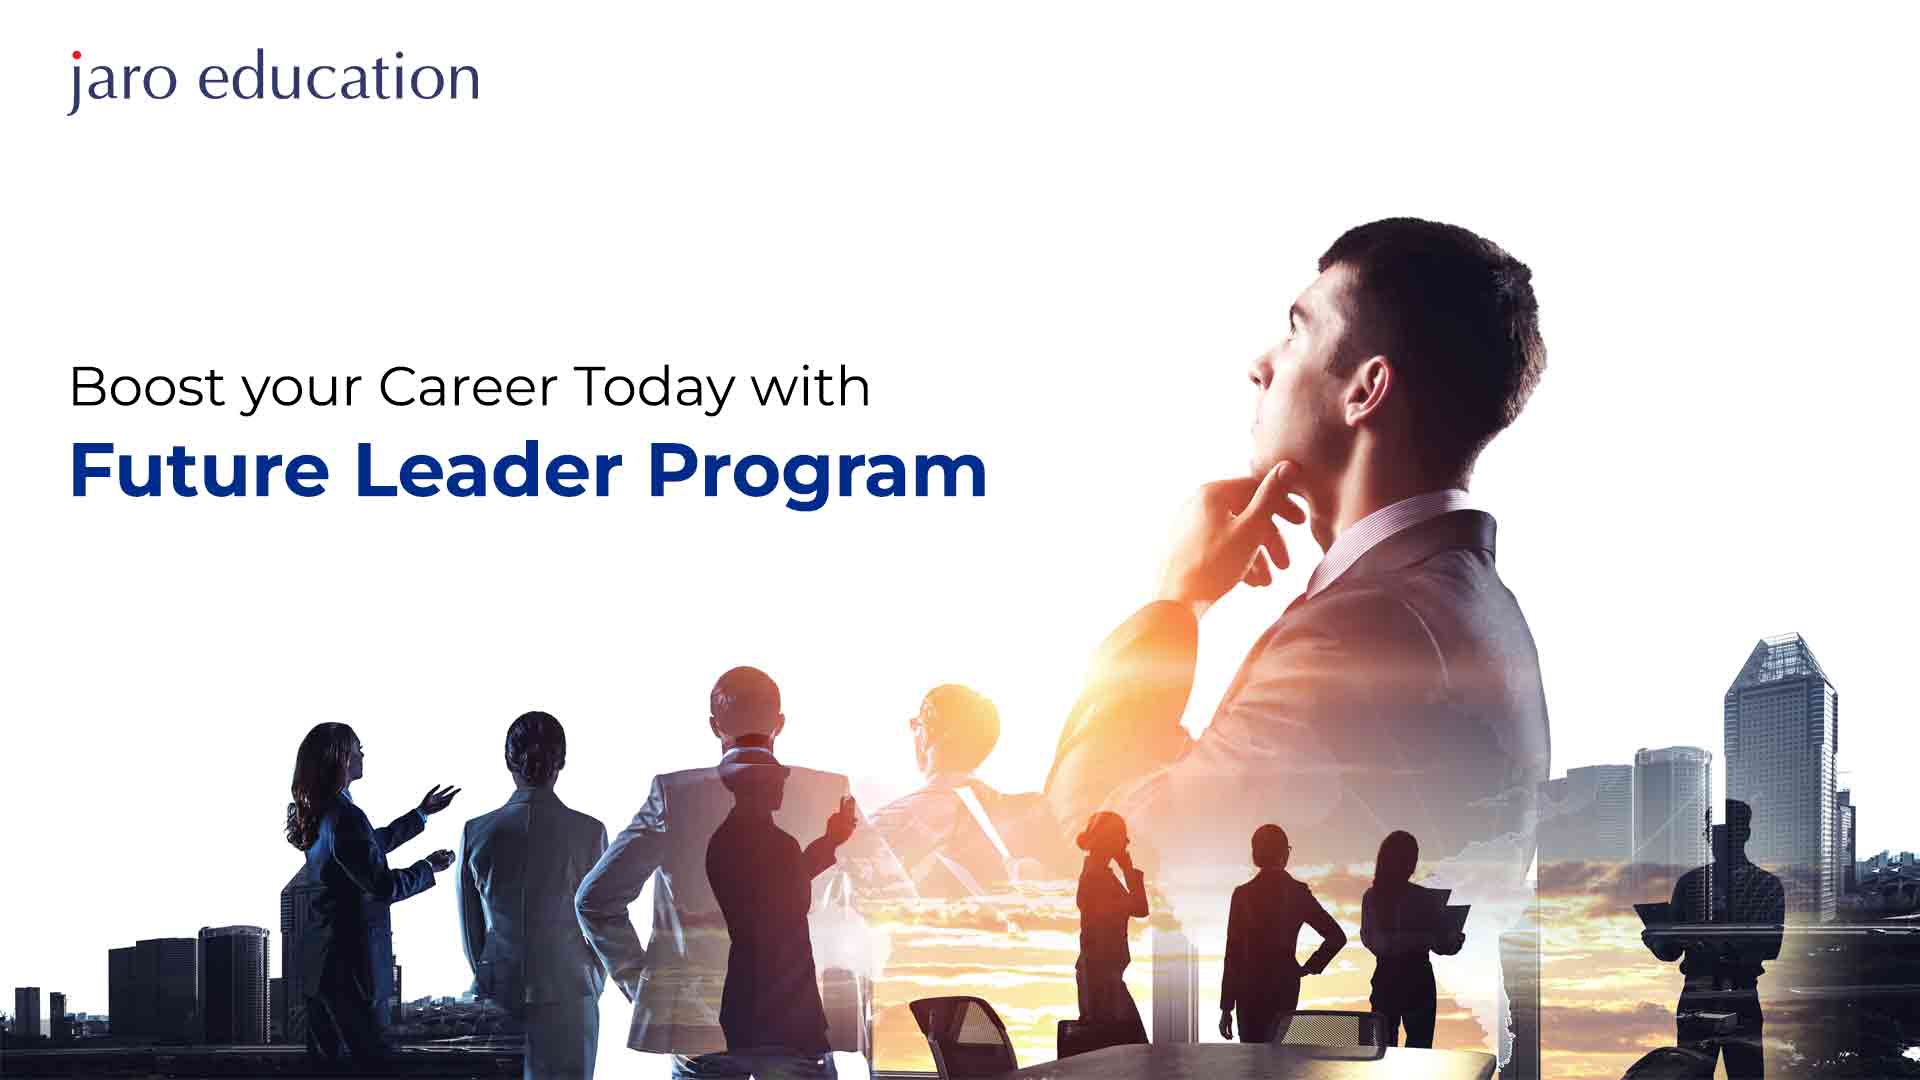 Boost-your-Career-Today-with-Future-Leader-Program jaro